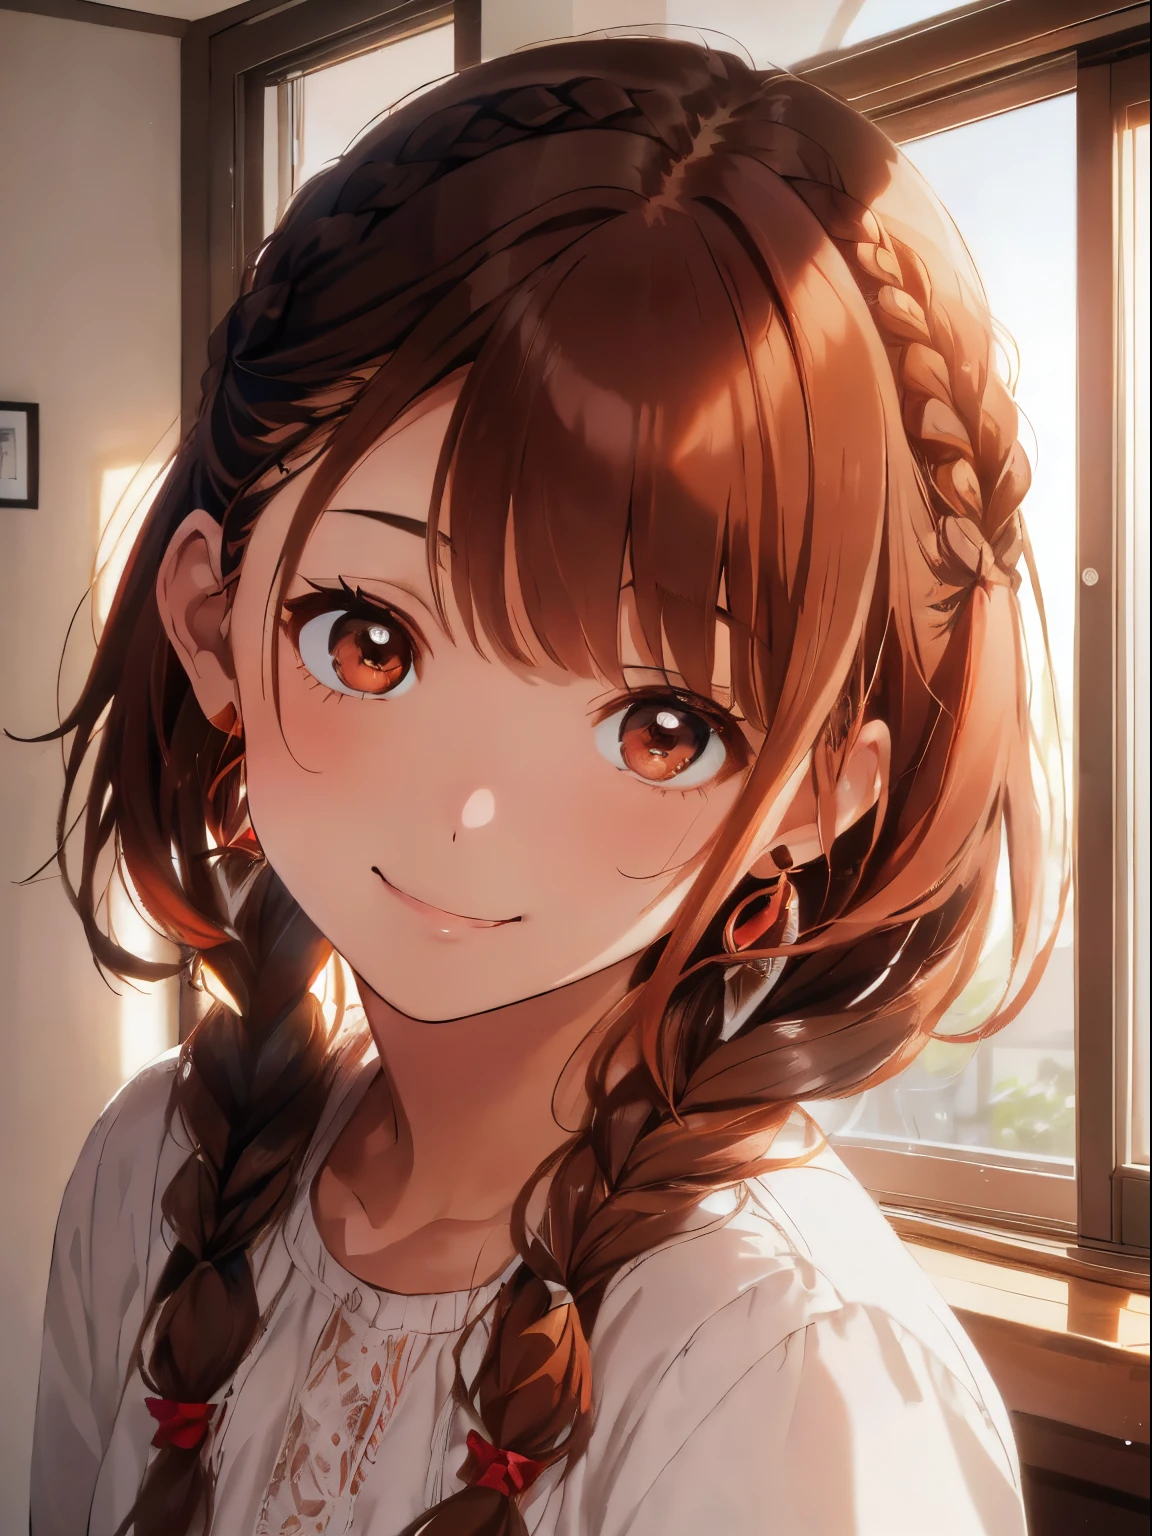 Bedroom with bright sunlight,fluffy hair,((With bangs)),brown haired,((Braided shorthair)),Slightly red tide,((Brown eyes)),(Gesture to put hair over the ears),((Front view)),kindly smile,Kamimei,(((close up of face))),